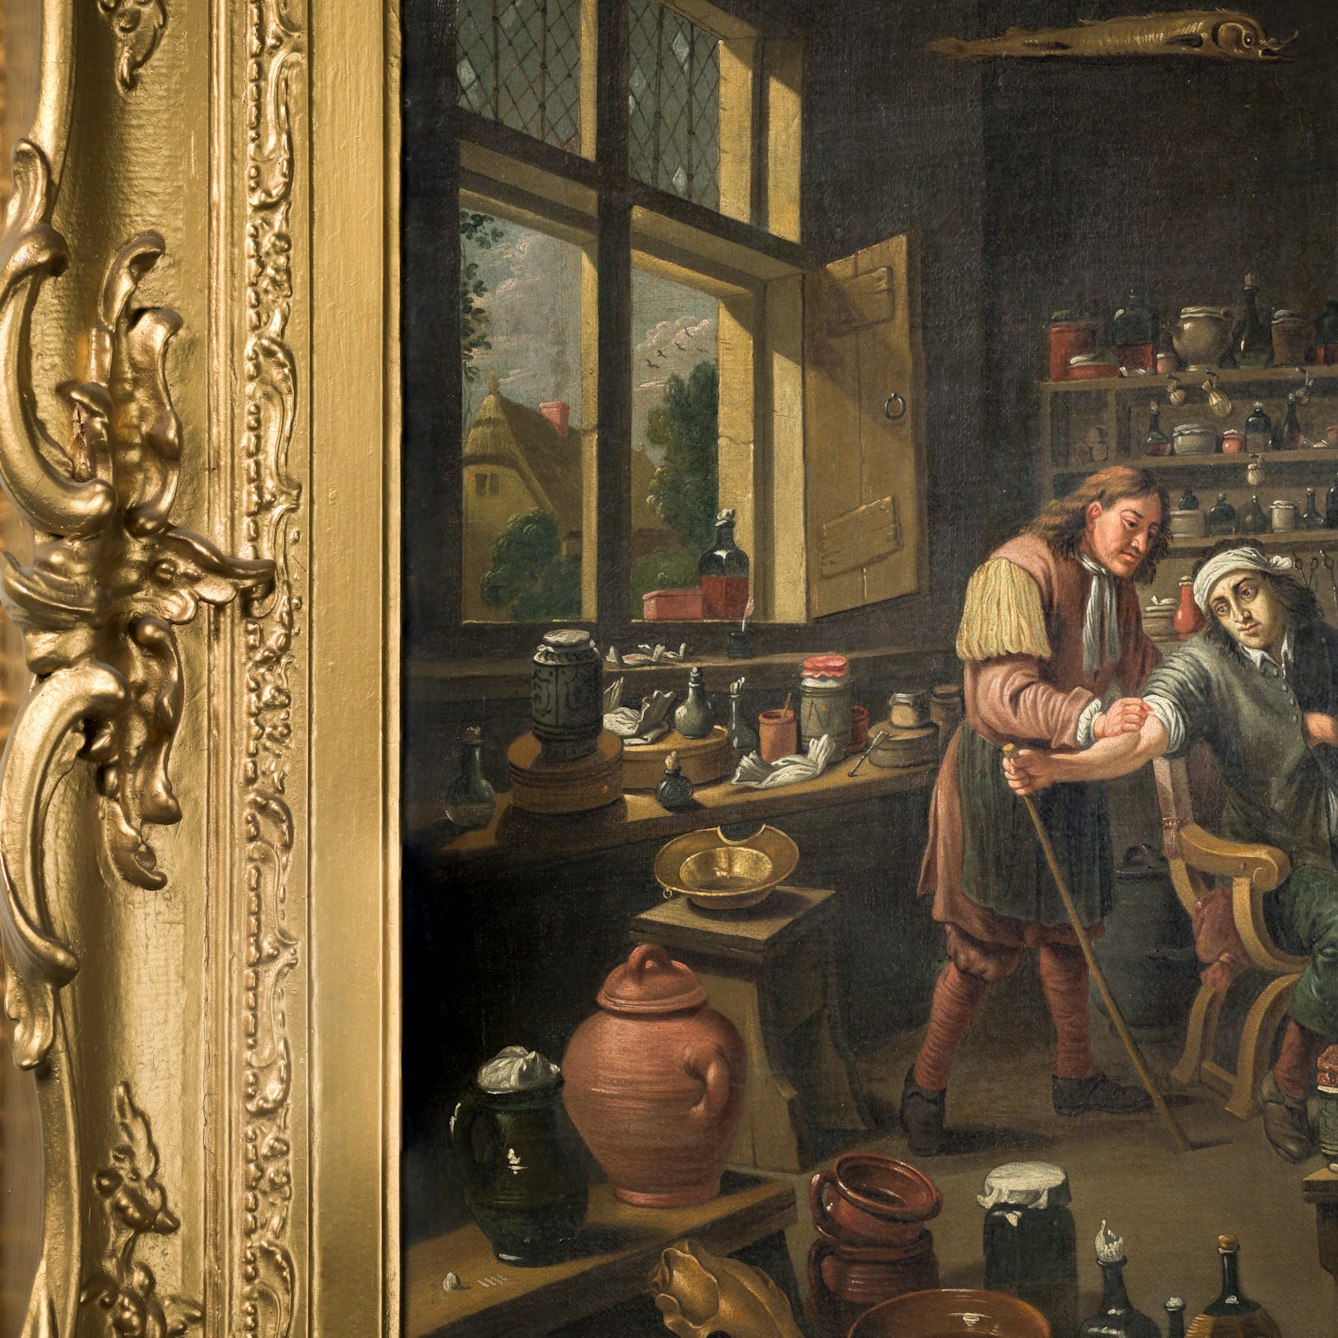 Photograph of a section of an oil painting in a gilded ornate frame, against a brick wall painted white. The oil painting shows a man letting blood from another seated man's arm. Beside them stands a woman holding a bucket. Waiting dates from 1610 to 1690.